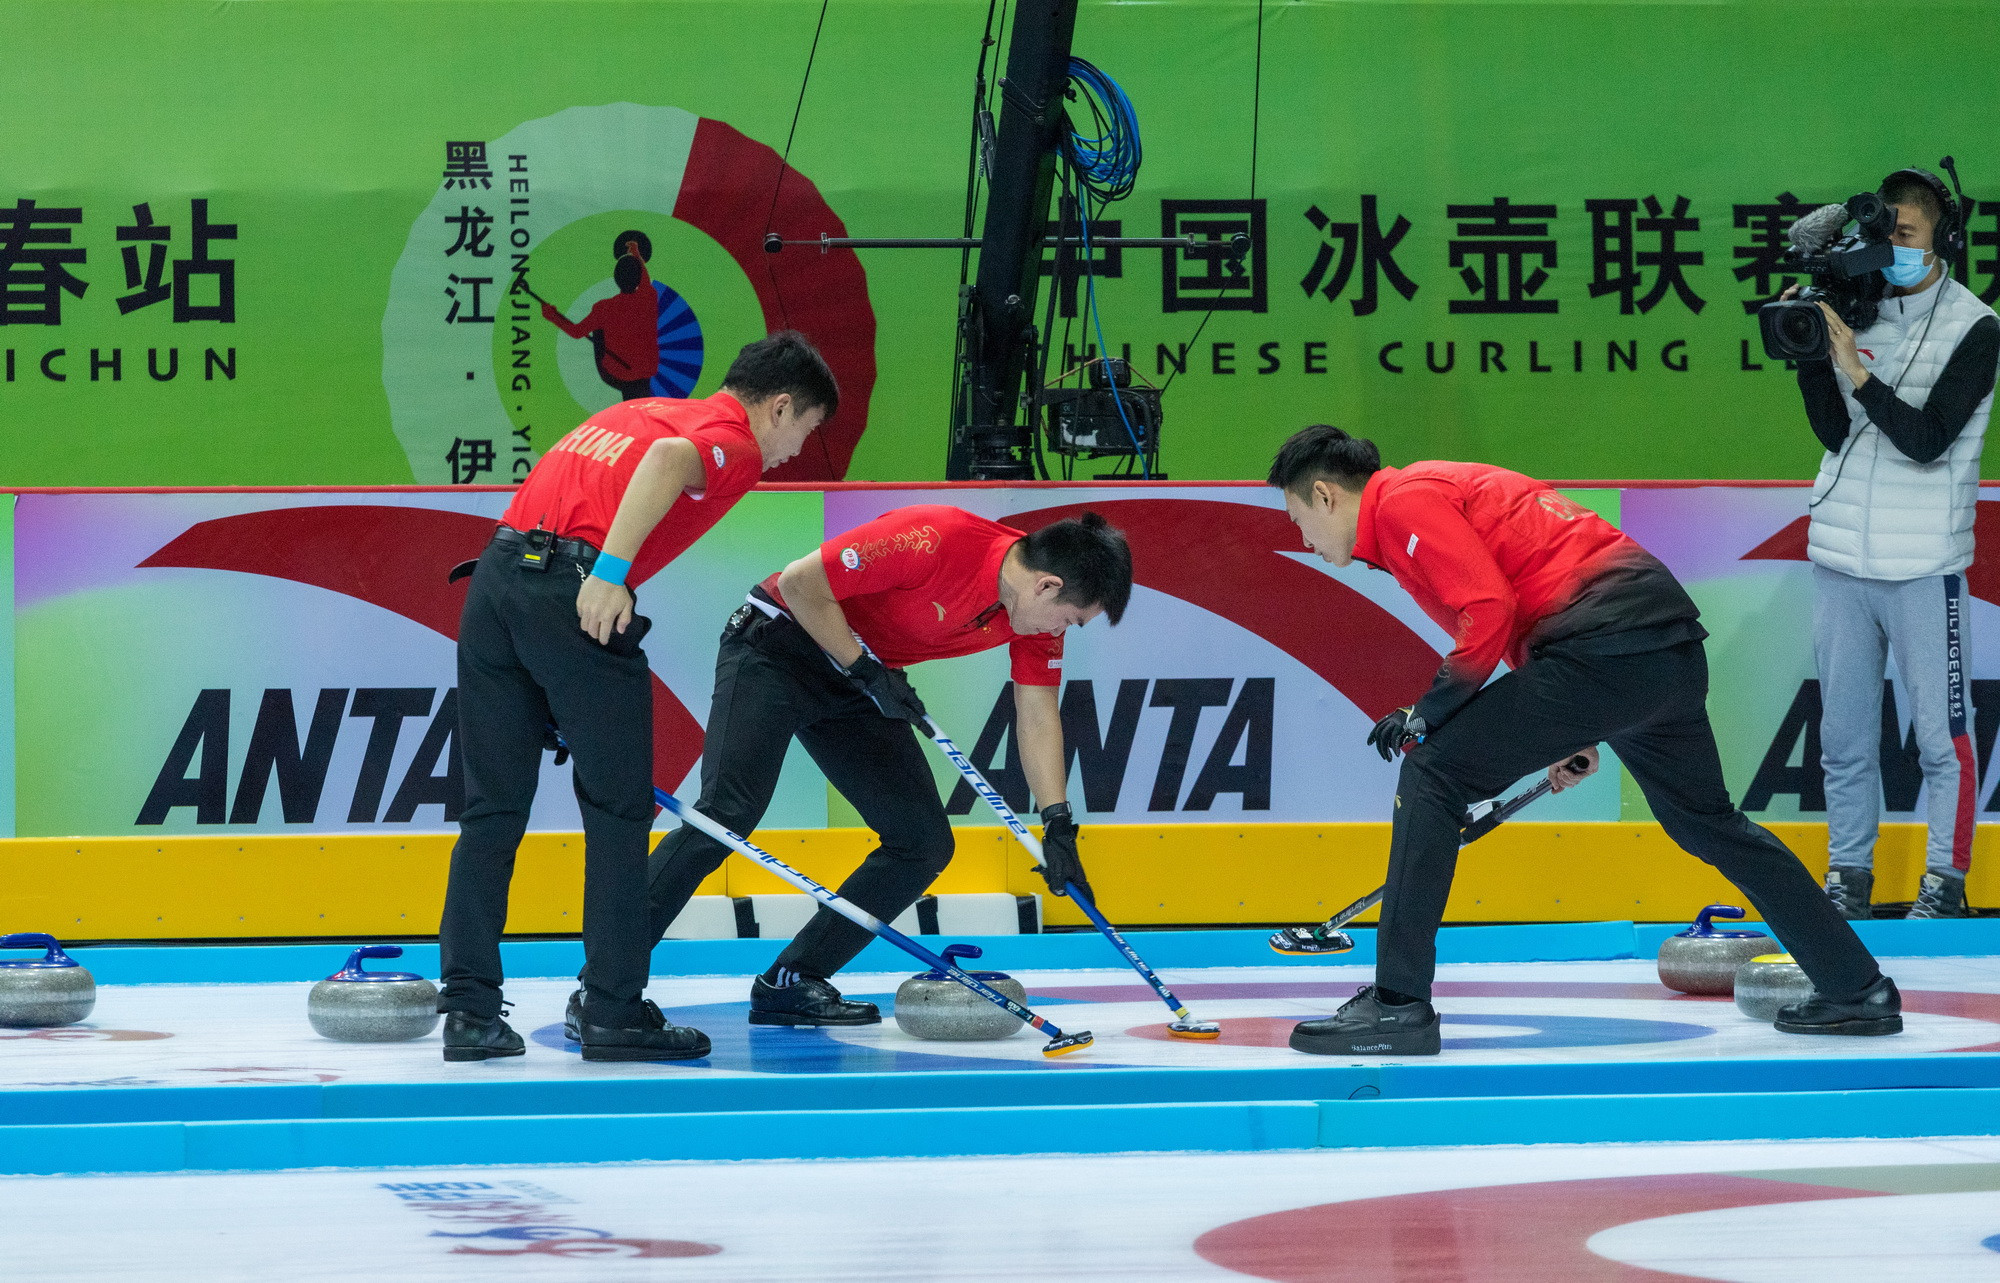 More than 120 players were involved in the Chinese Curling League in Yichun City ©prnewswire.com